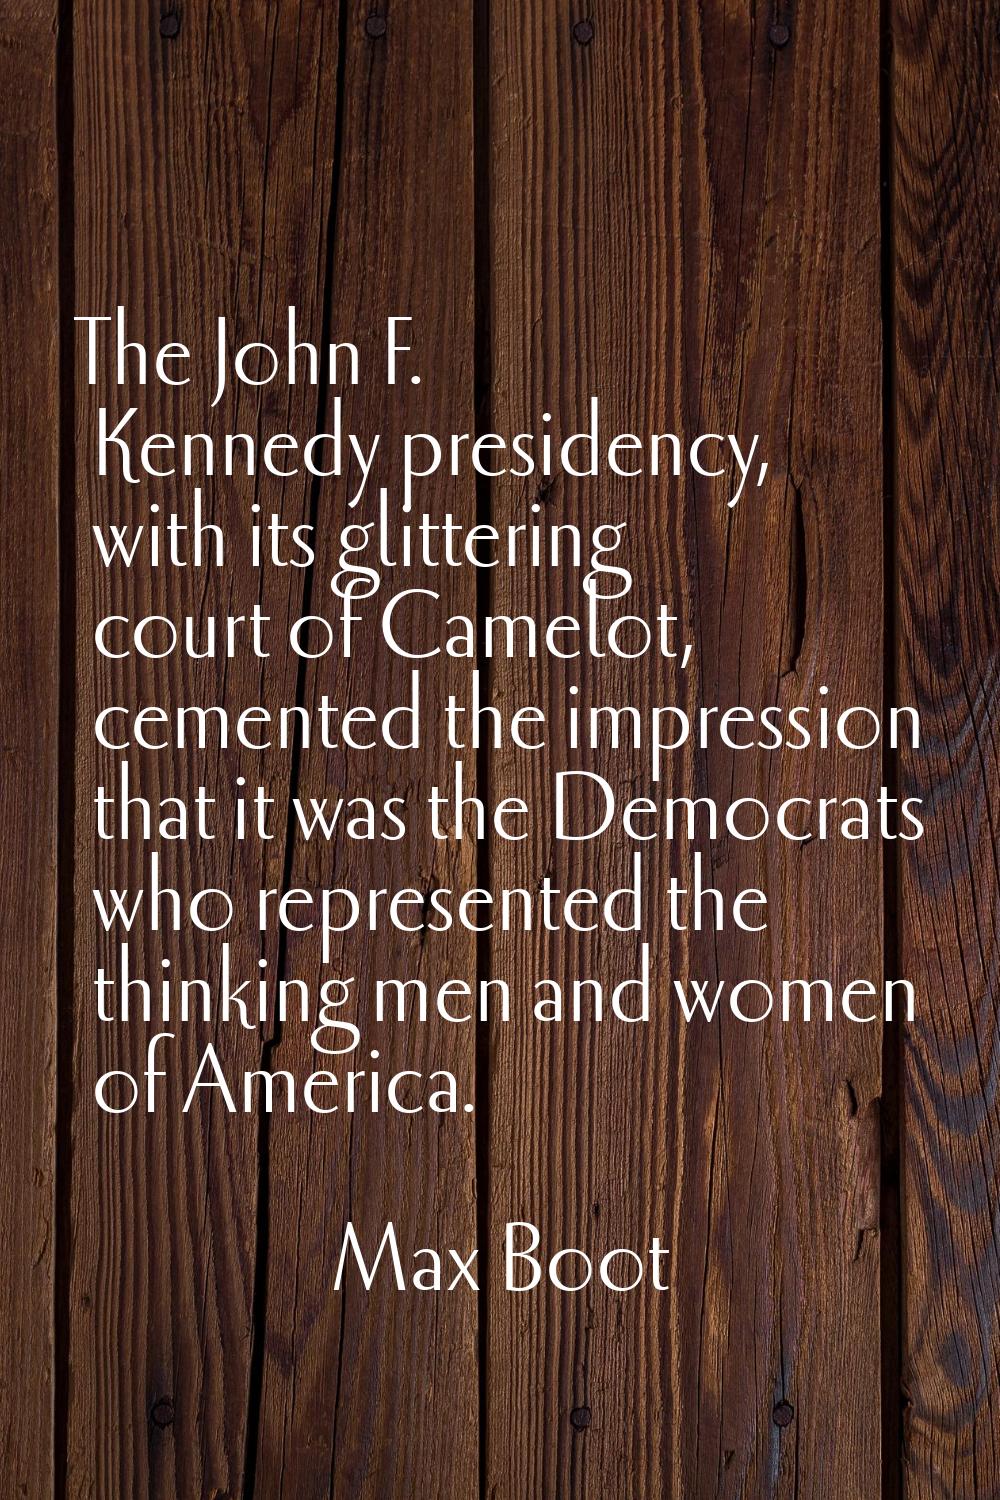 The John F. Kennedy presidency, with its glittering court of Camelot, cemented the impression that 